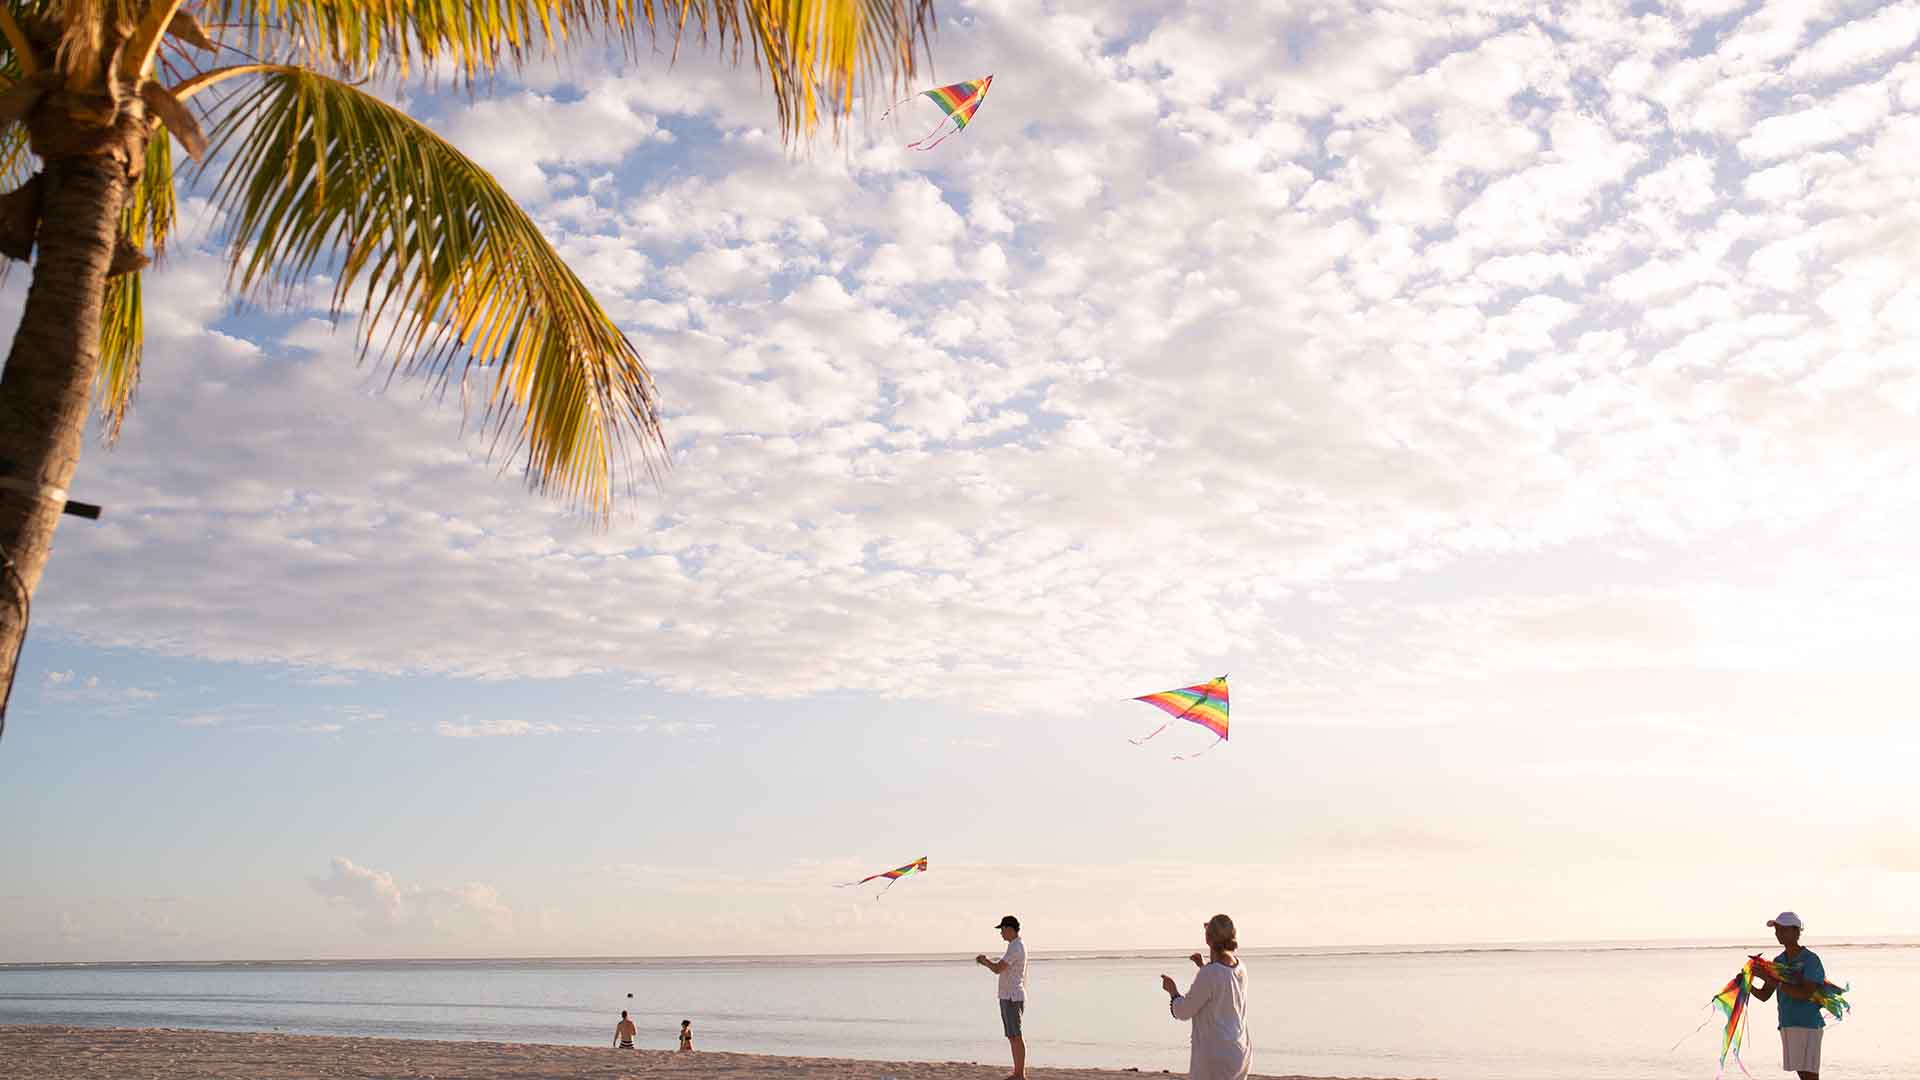 flying activities in jw marriott hotel in mauritius on the beach